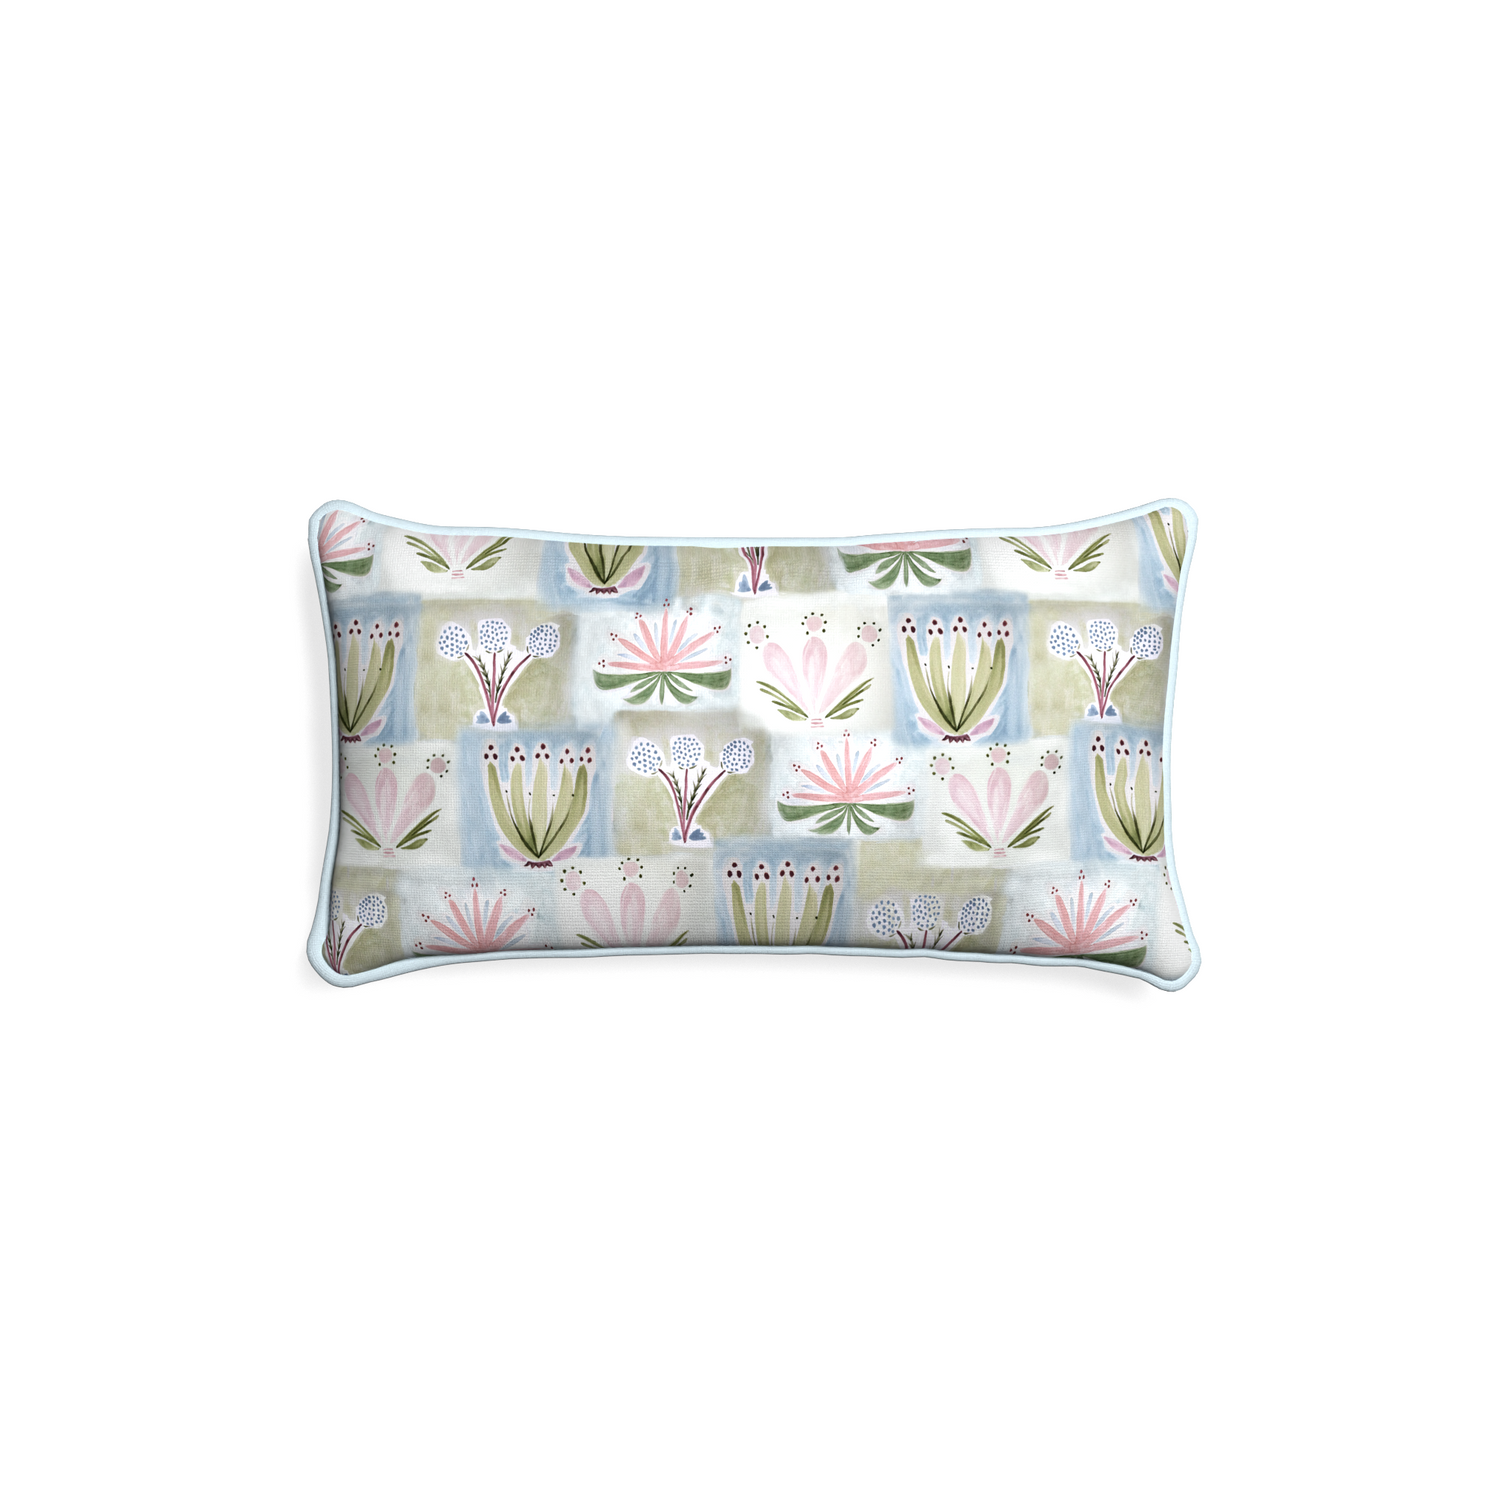 Petite-lumbar harper custom hand-painted floralpillow with powder piping on white background